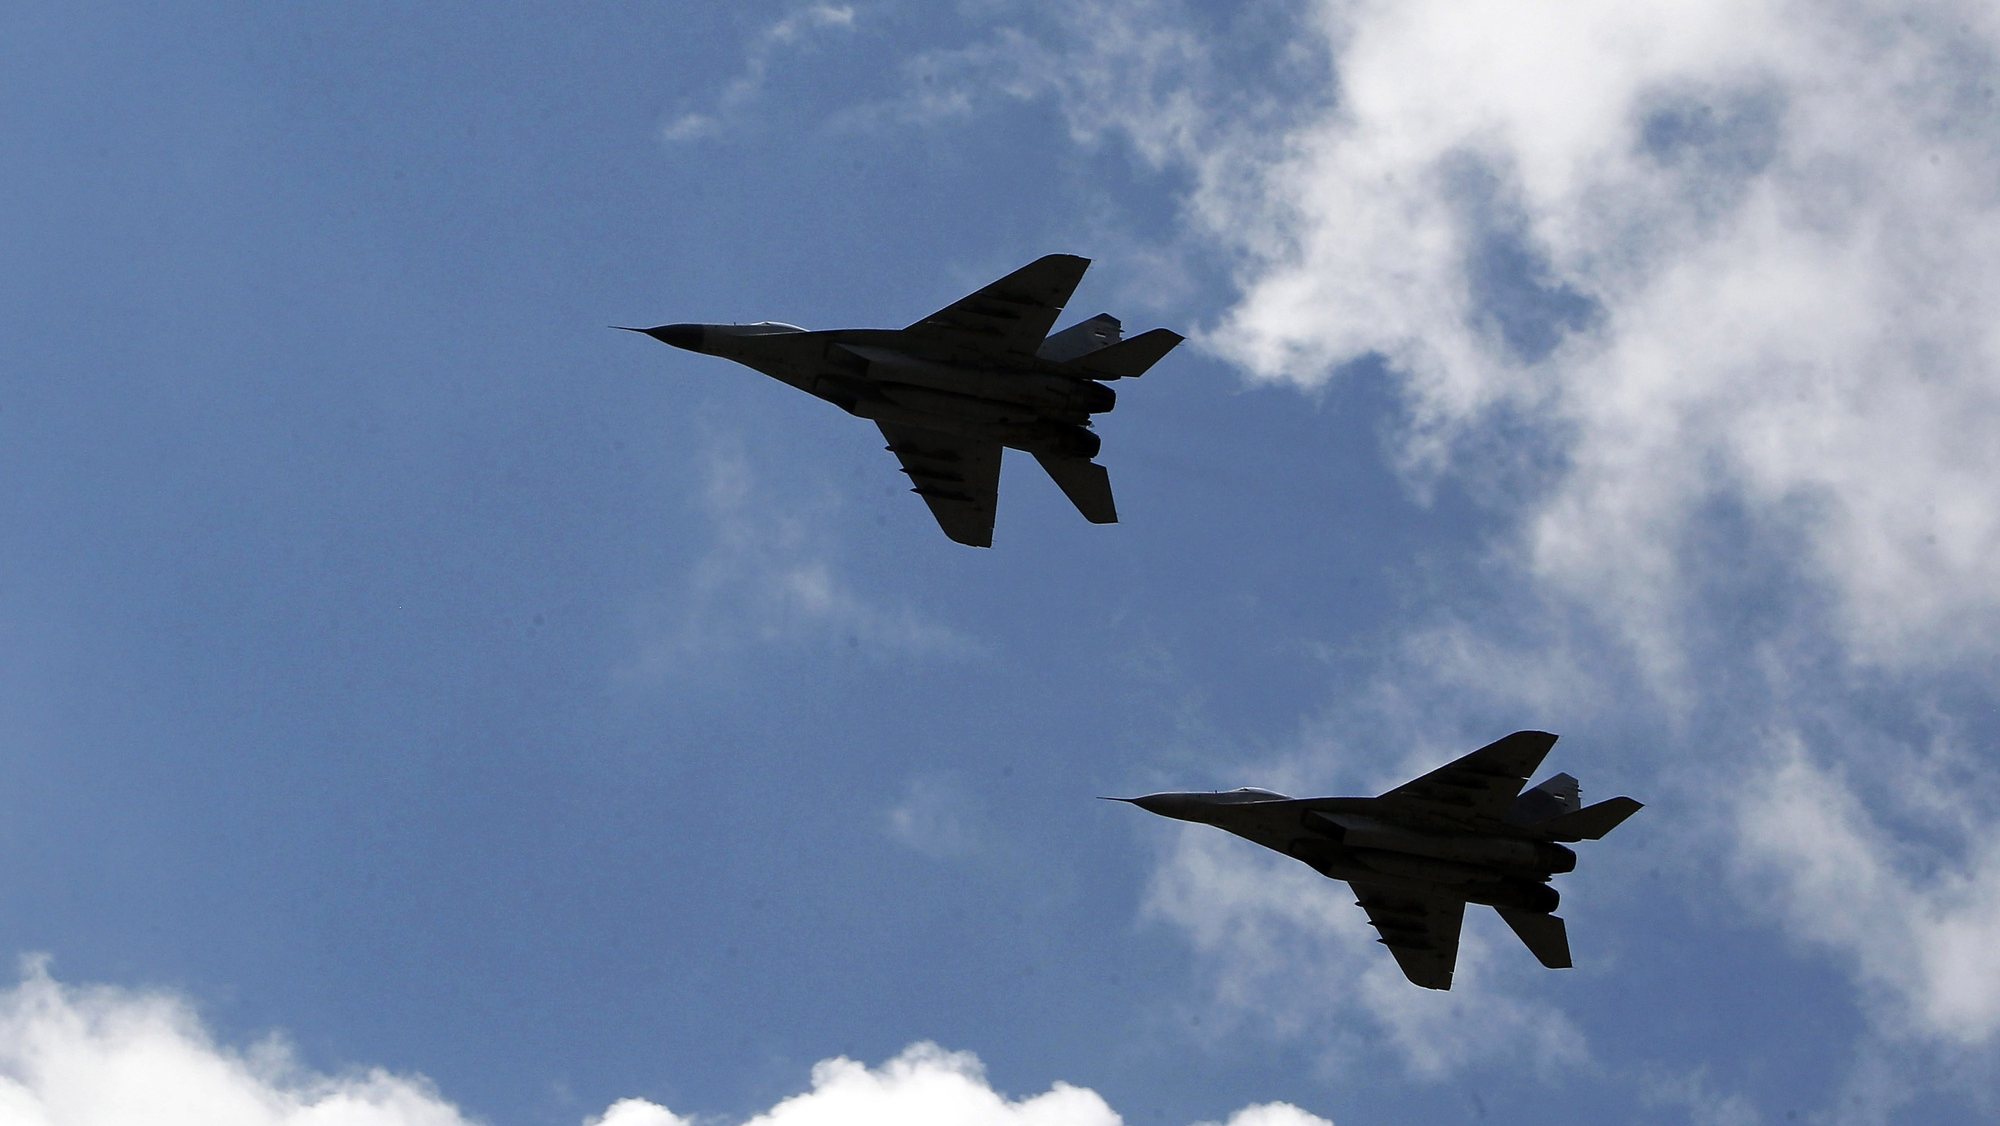 epa07560559 The MIG-29 jet fighters of the Serbian Army fly past during a military parade &#039;Defense of Freedom&#039; to mark the Victory Day in Nis, Serbia, 10 May 2019. About 4,000 members of the Army and Police, 300 combat vehicles and about 40 aircrafts participated in the parade to celebrate the 74th anniversary of the victory in the World War II over Nazi Germany and its allies.  EPA/DJORDJE SAVIC